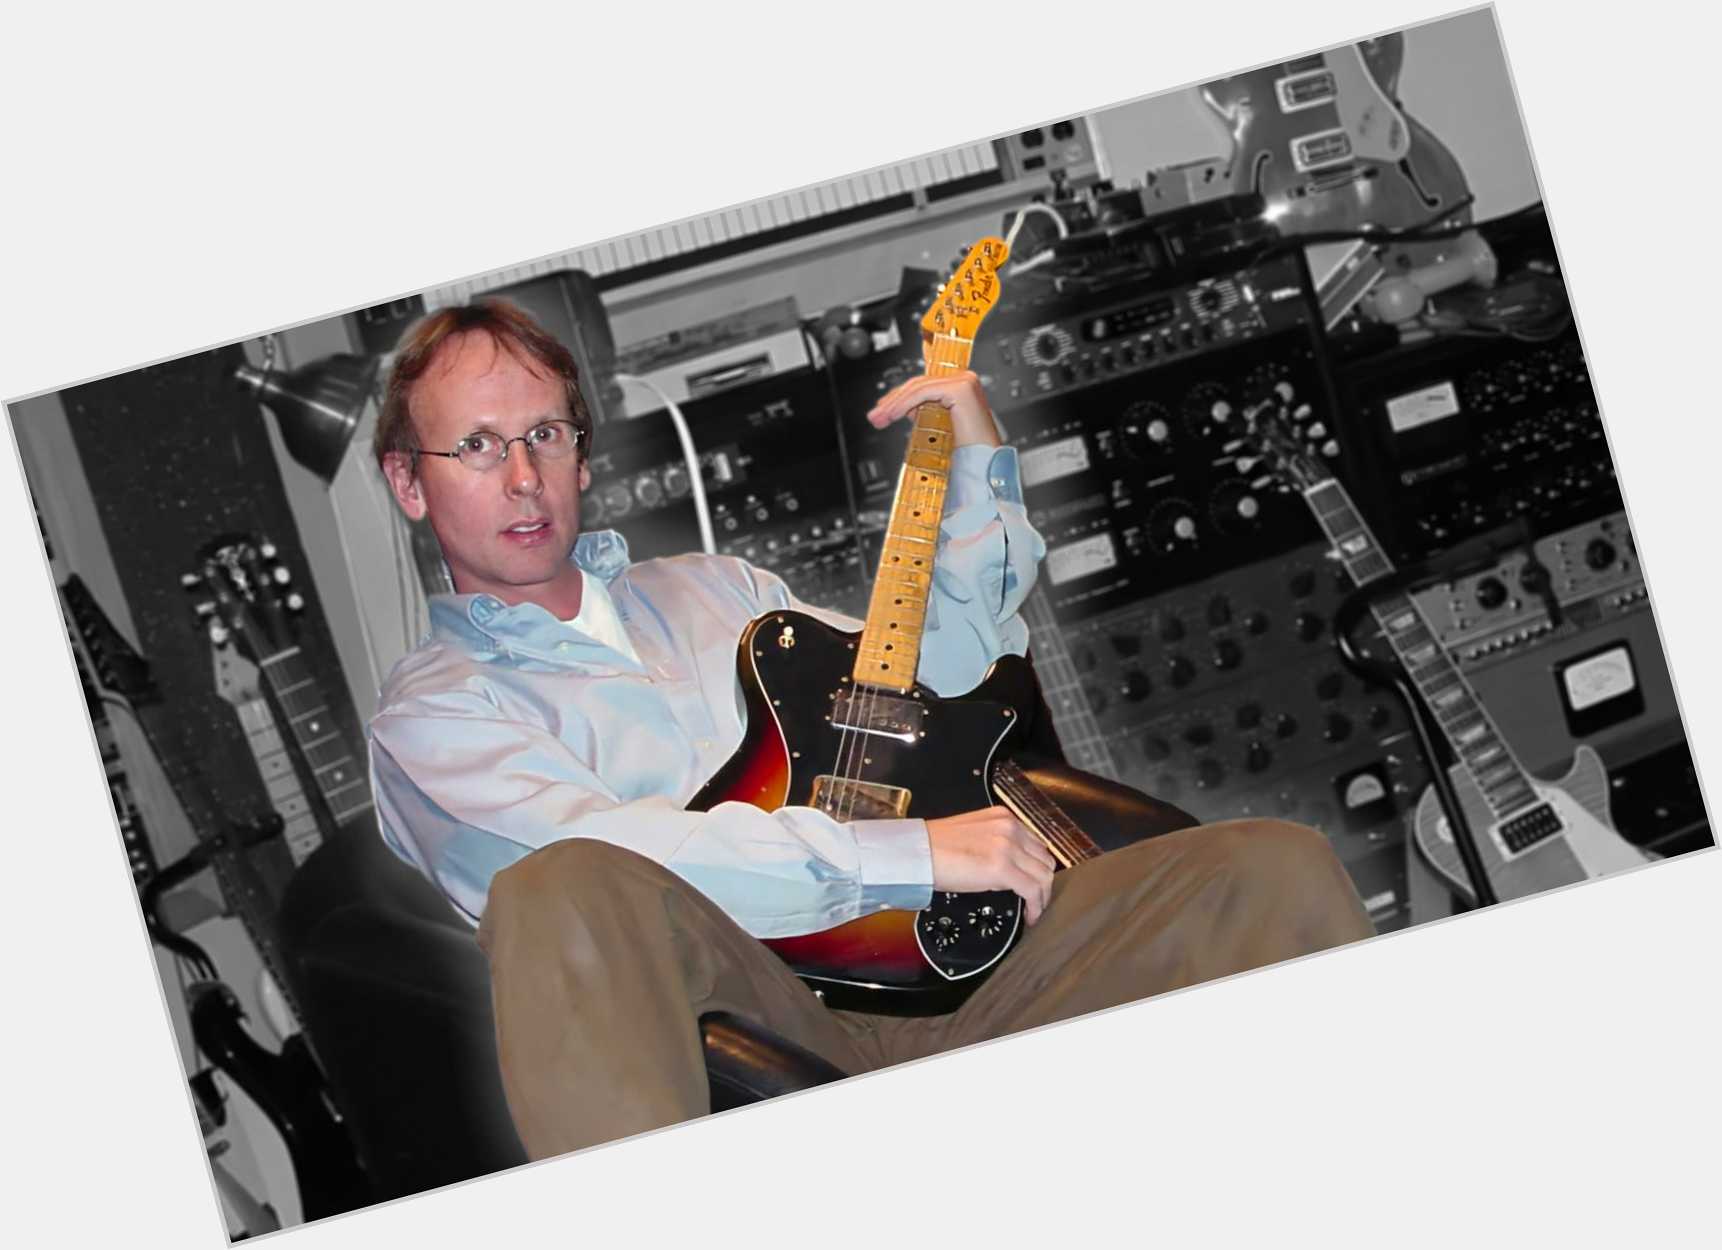 <a href="/hot-men/jim-johnston/is-he-cooking-cookin-what-love-tonight-night">Jim Johnston</a>  